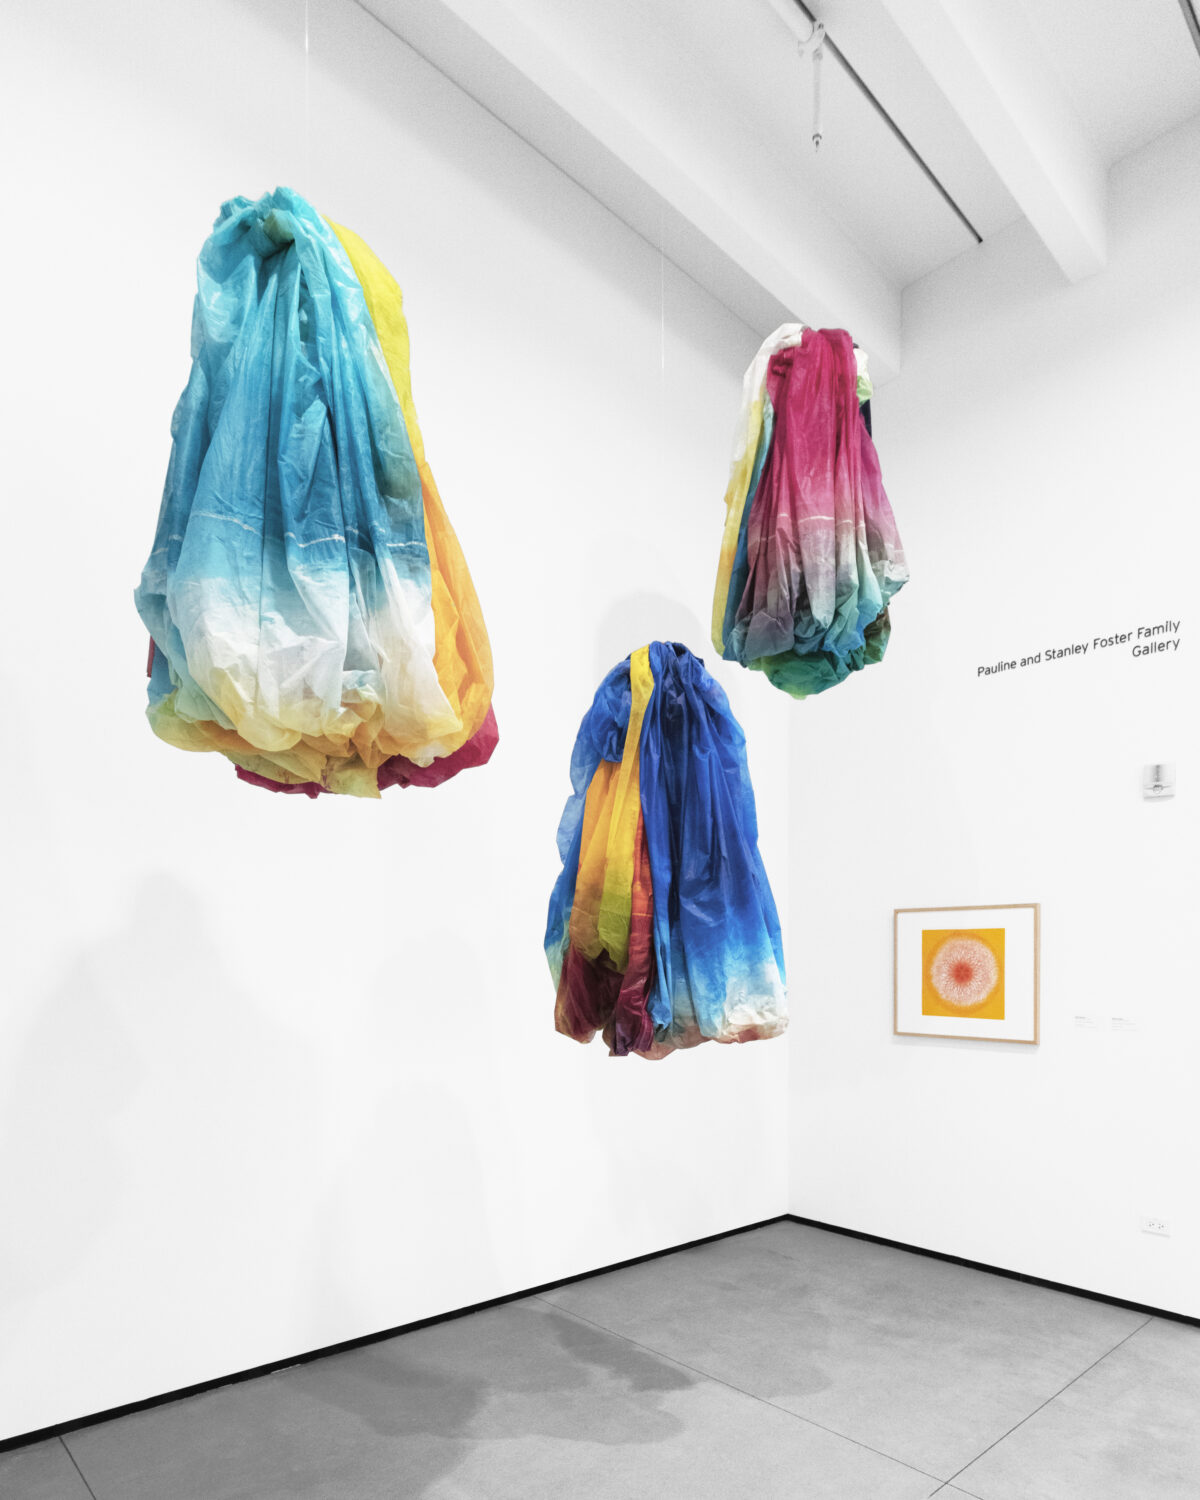 Suspended from the ceiling, three colorful canvases draped like dresses.